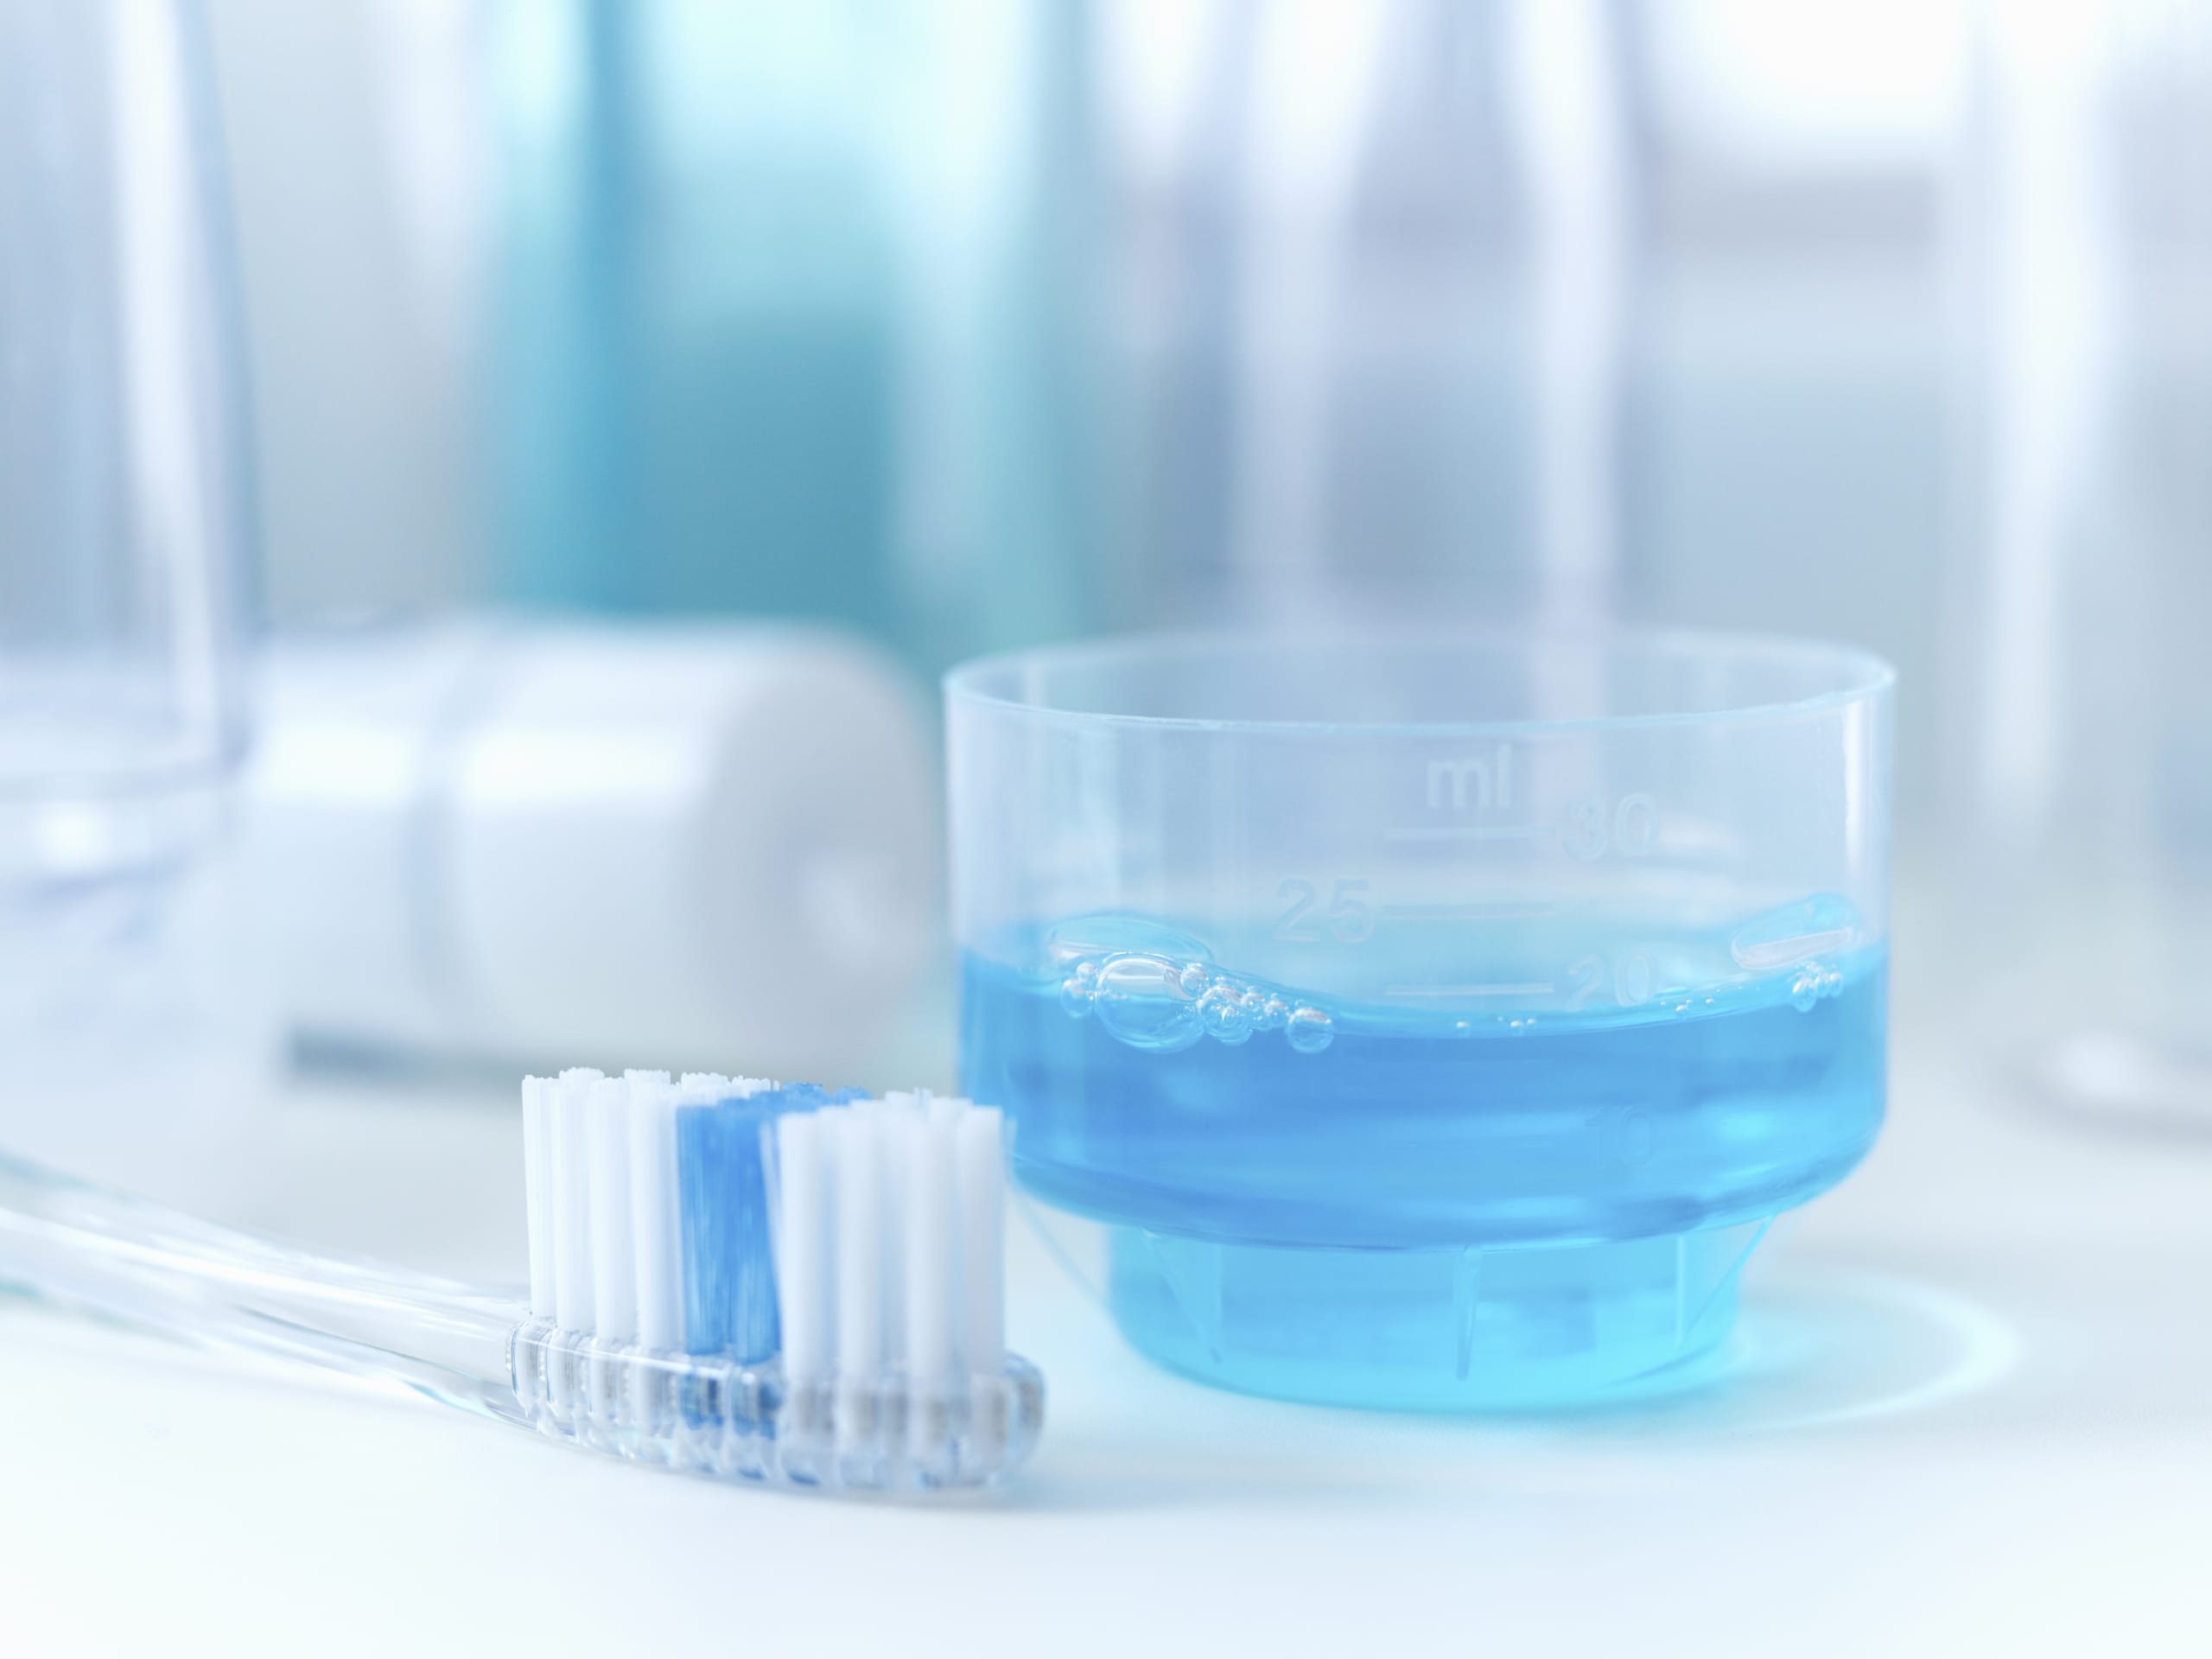 Lifestyle_Toothbrush and Mouthwash